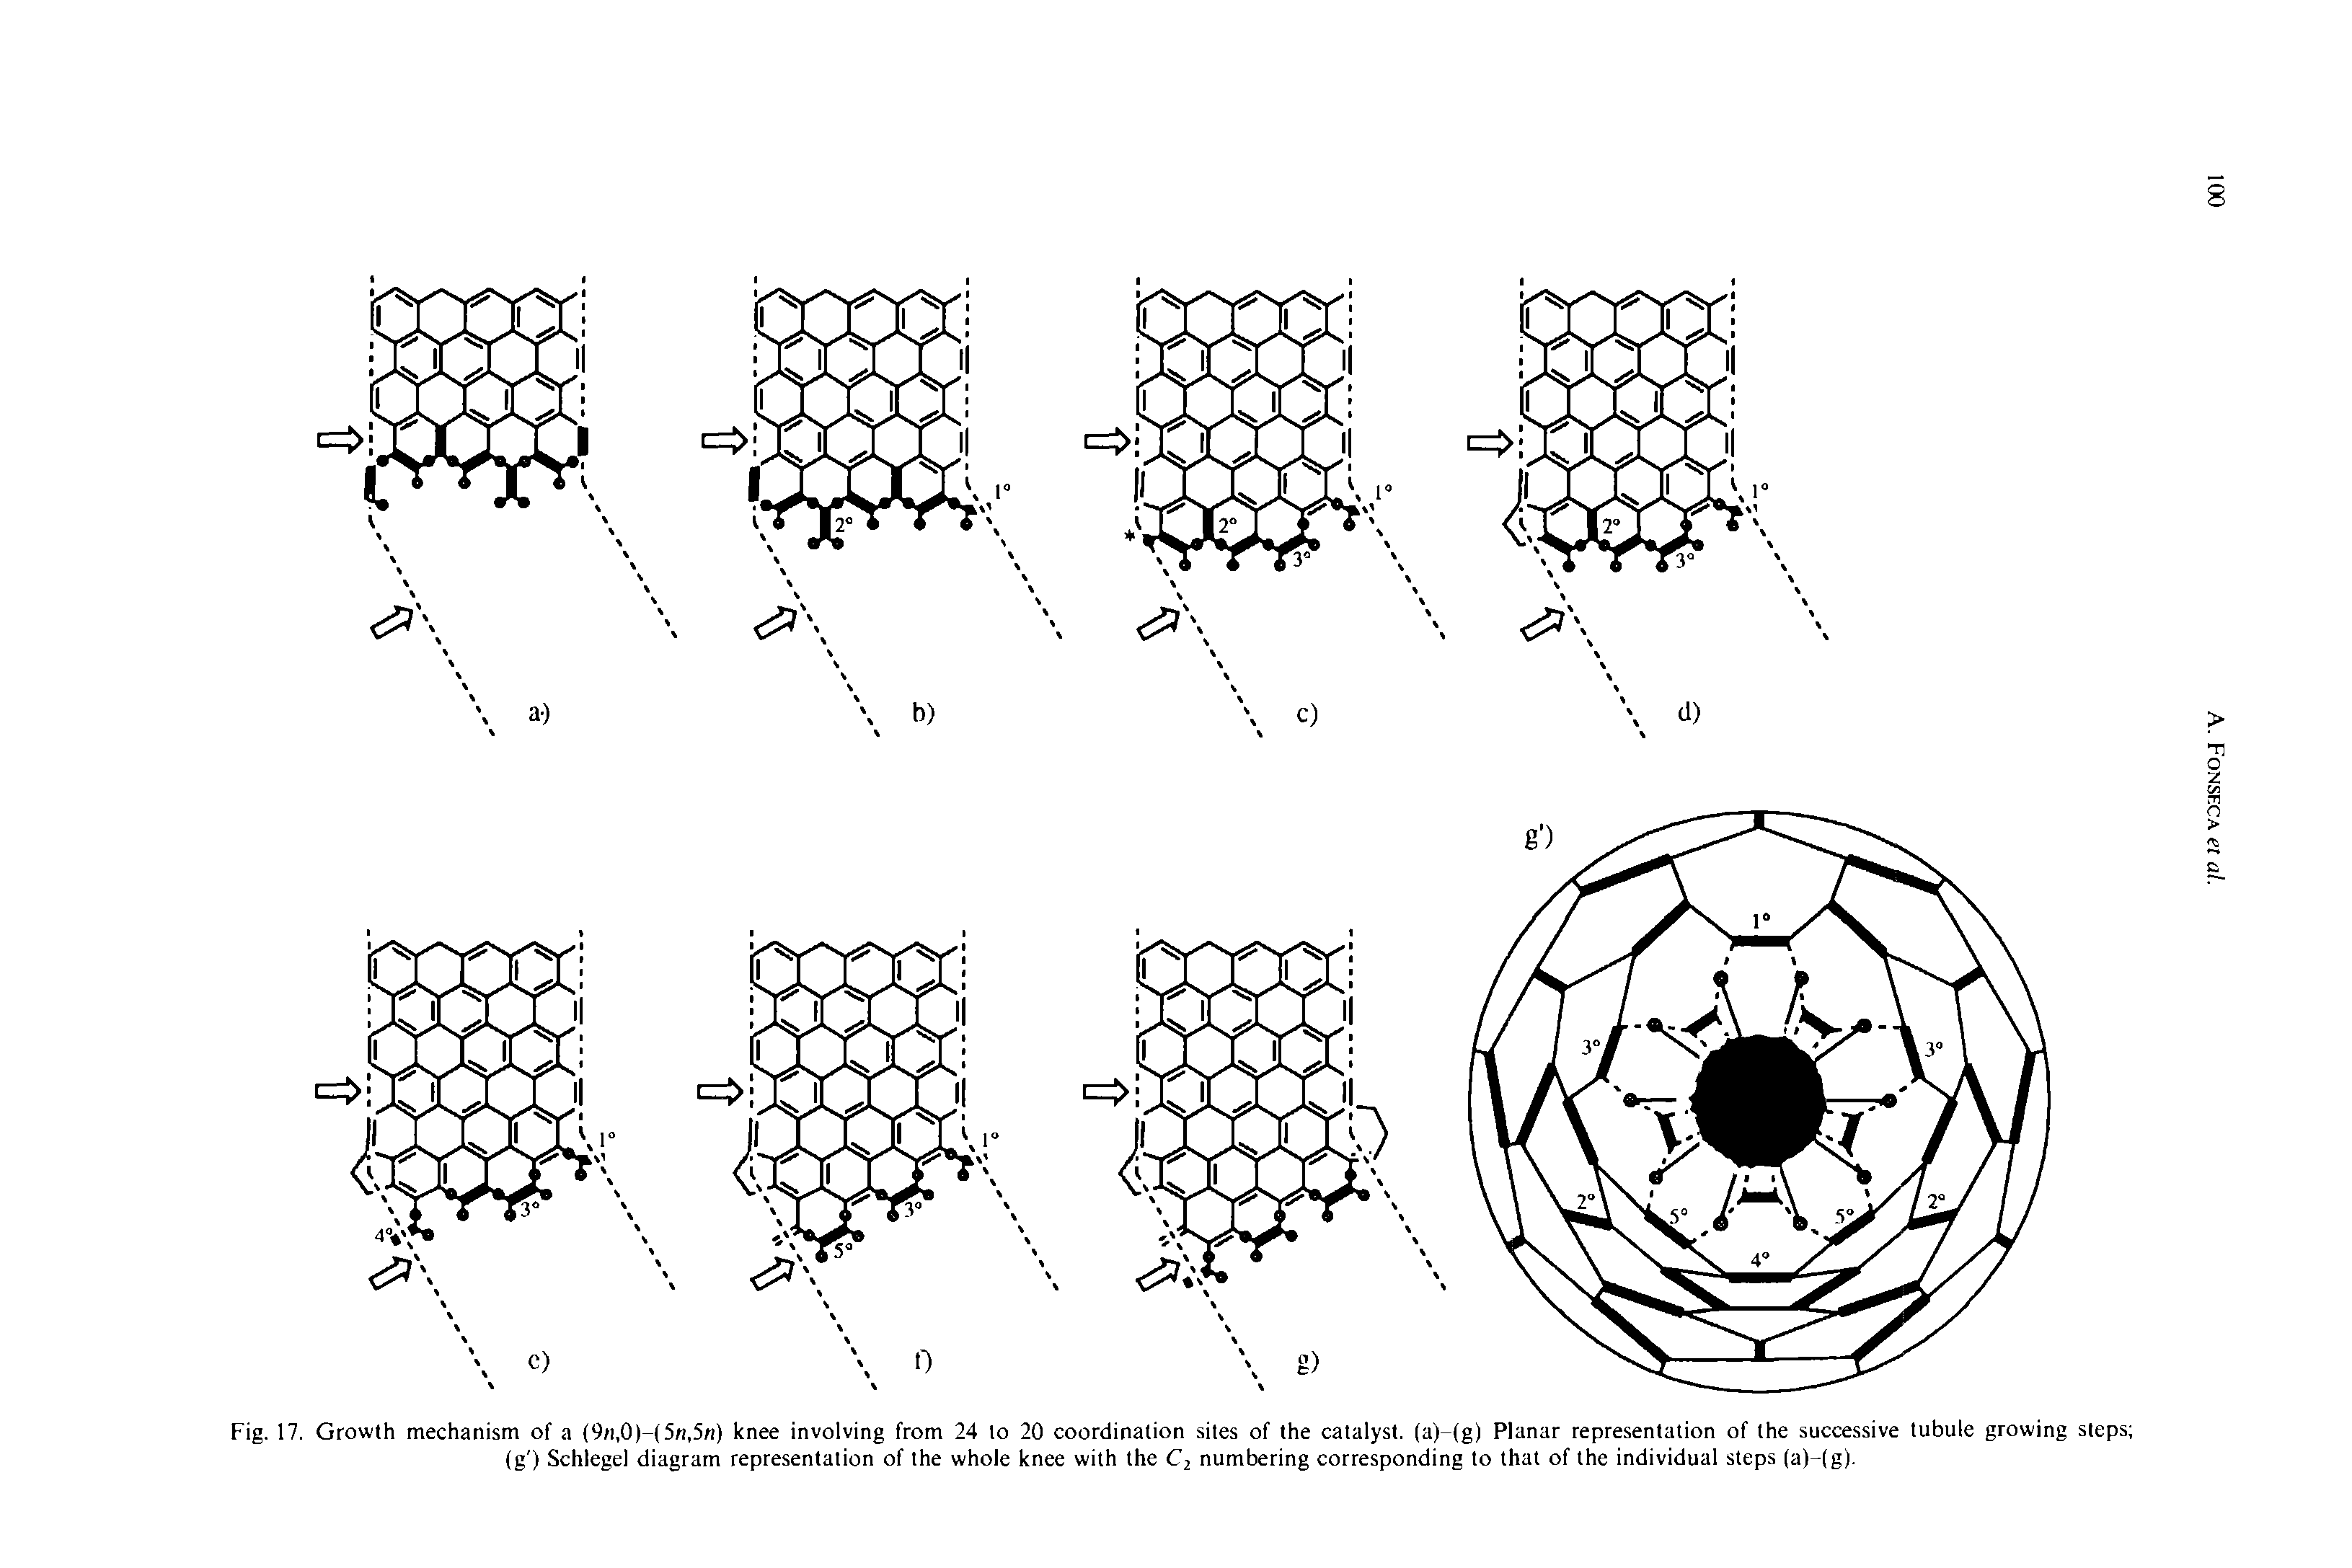 Fig. 17. Growth mechanism of a (9/i,0)-(5n,5n) knee involving from 24 to 20 coordination sites of the catalyst, (a)-(g) Planar representation of the successive tubule growing steps (g ) Schlegel diagram representation of the whole knee with the Ci numbering corresponding to that of the individual steps (a)-(g).